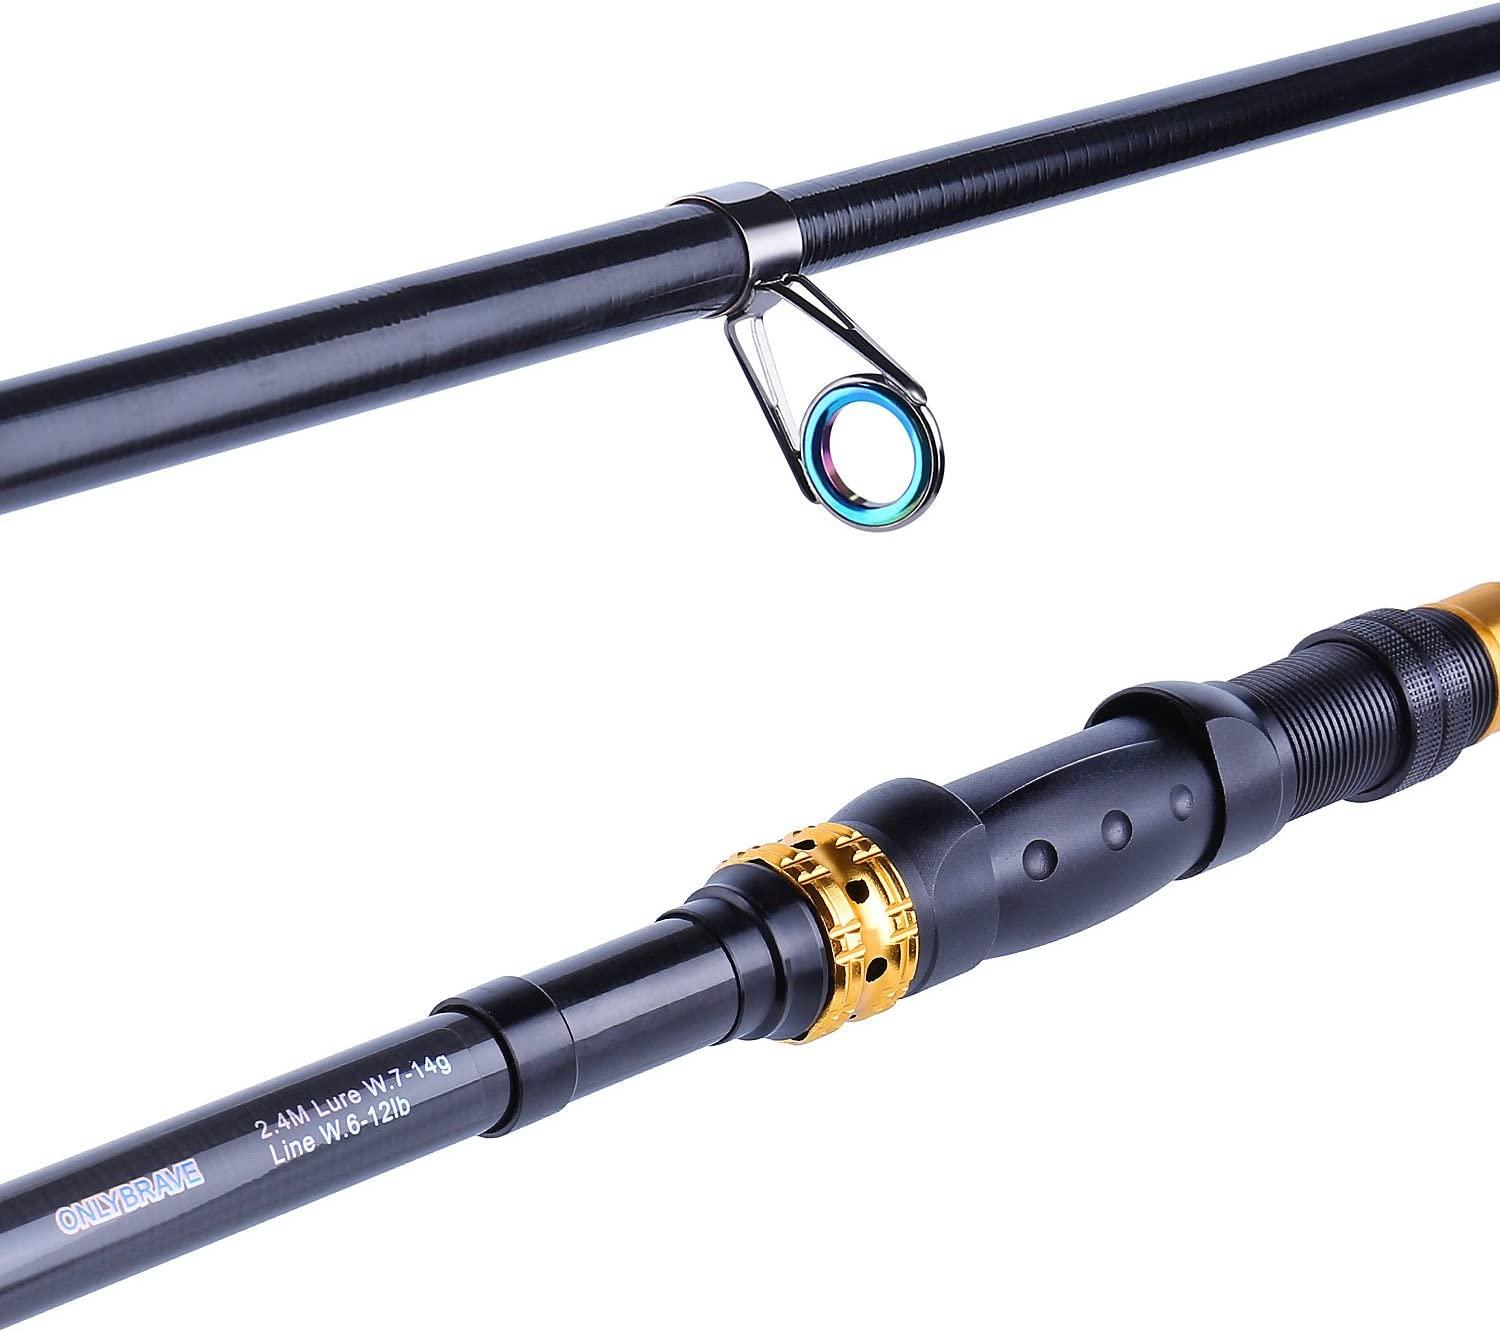 Sougayilang Telescopic Fishing Rod - 24 Ton Carbon Fiber Ultralight Fishing  Pole with CNC Reel Seat, Portable Retractable Handle, Stainless Steel  Guides for Bass Salmon Trout Fishing 1.8m/5.9ft